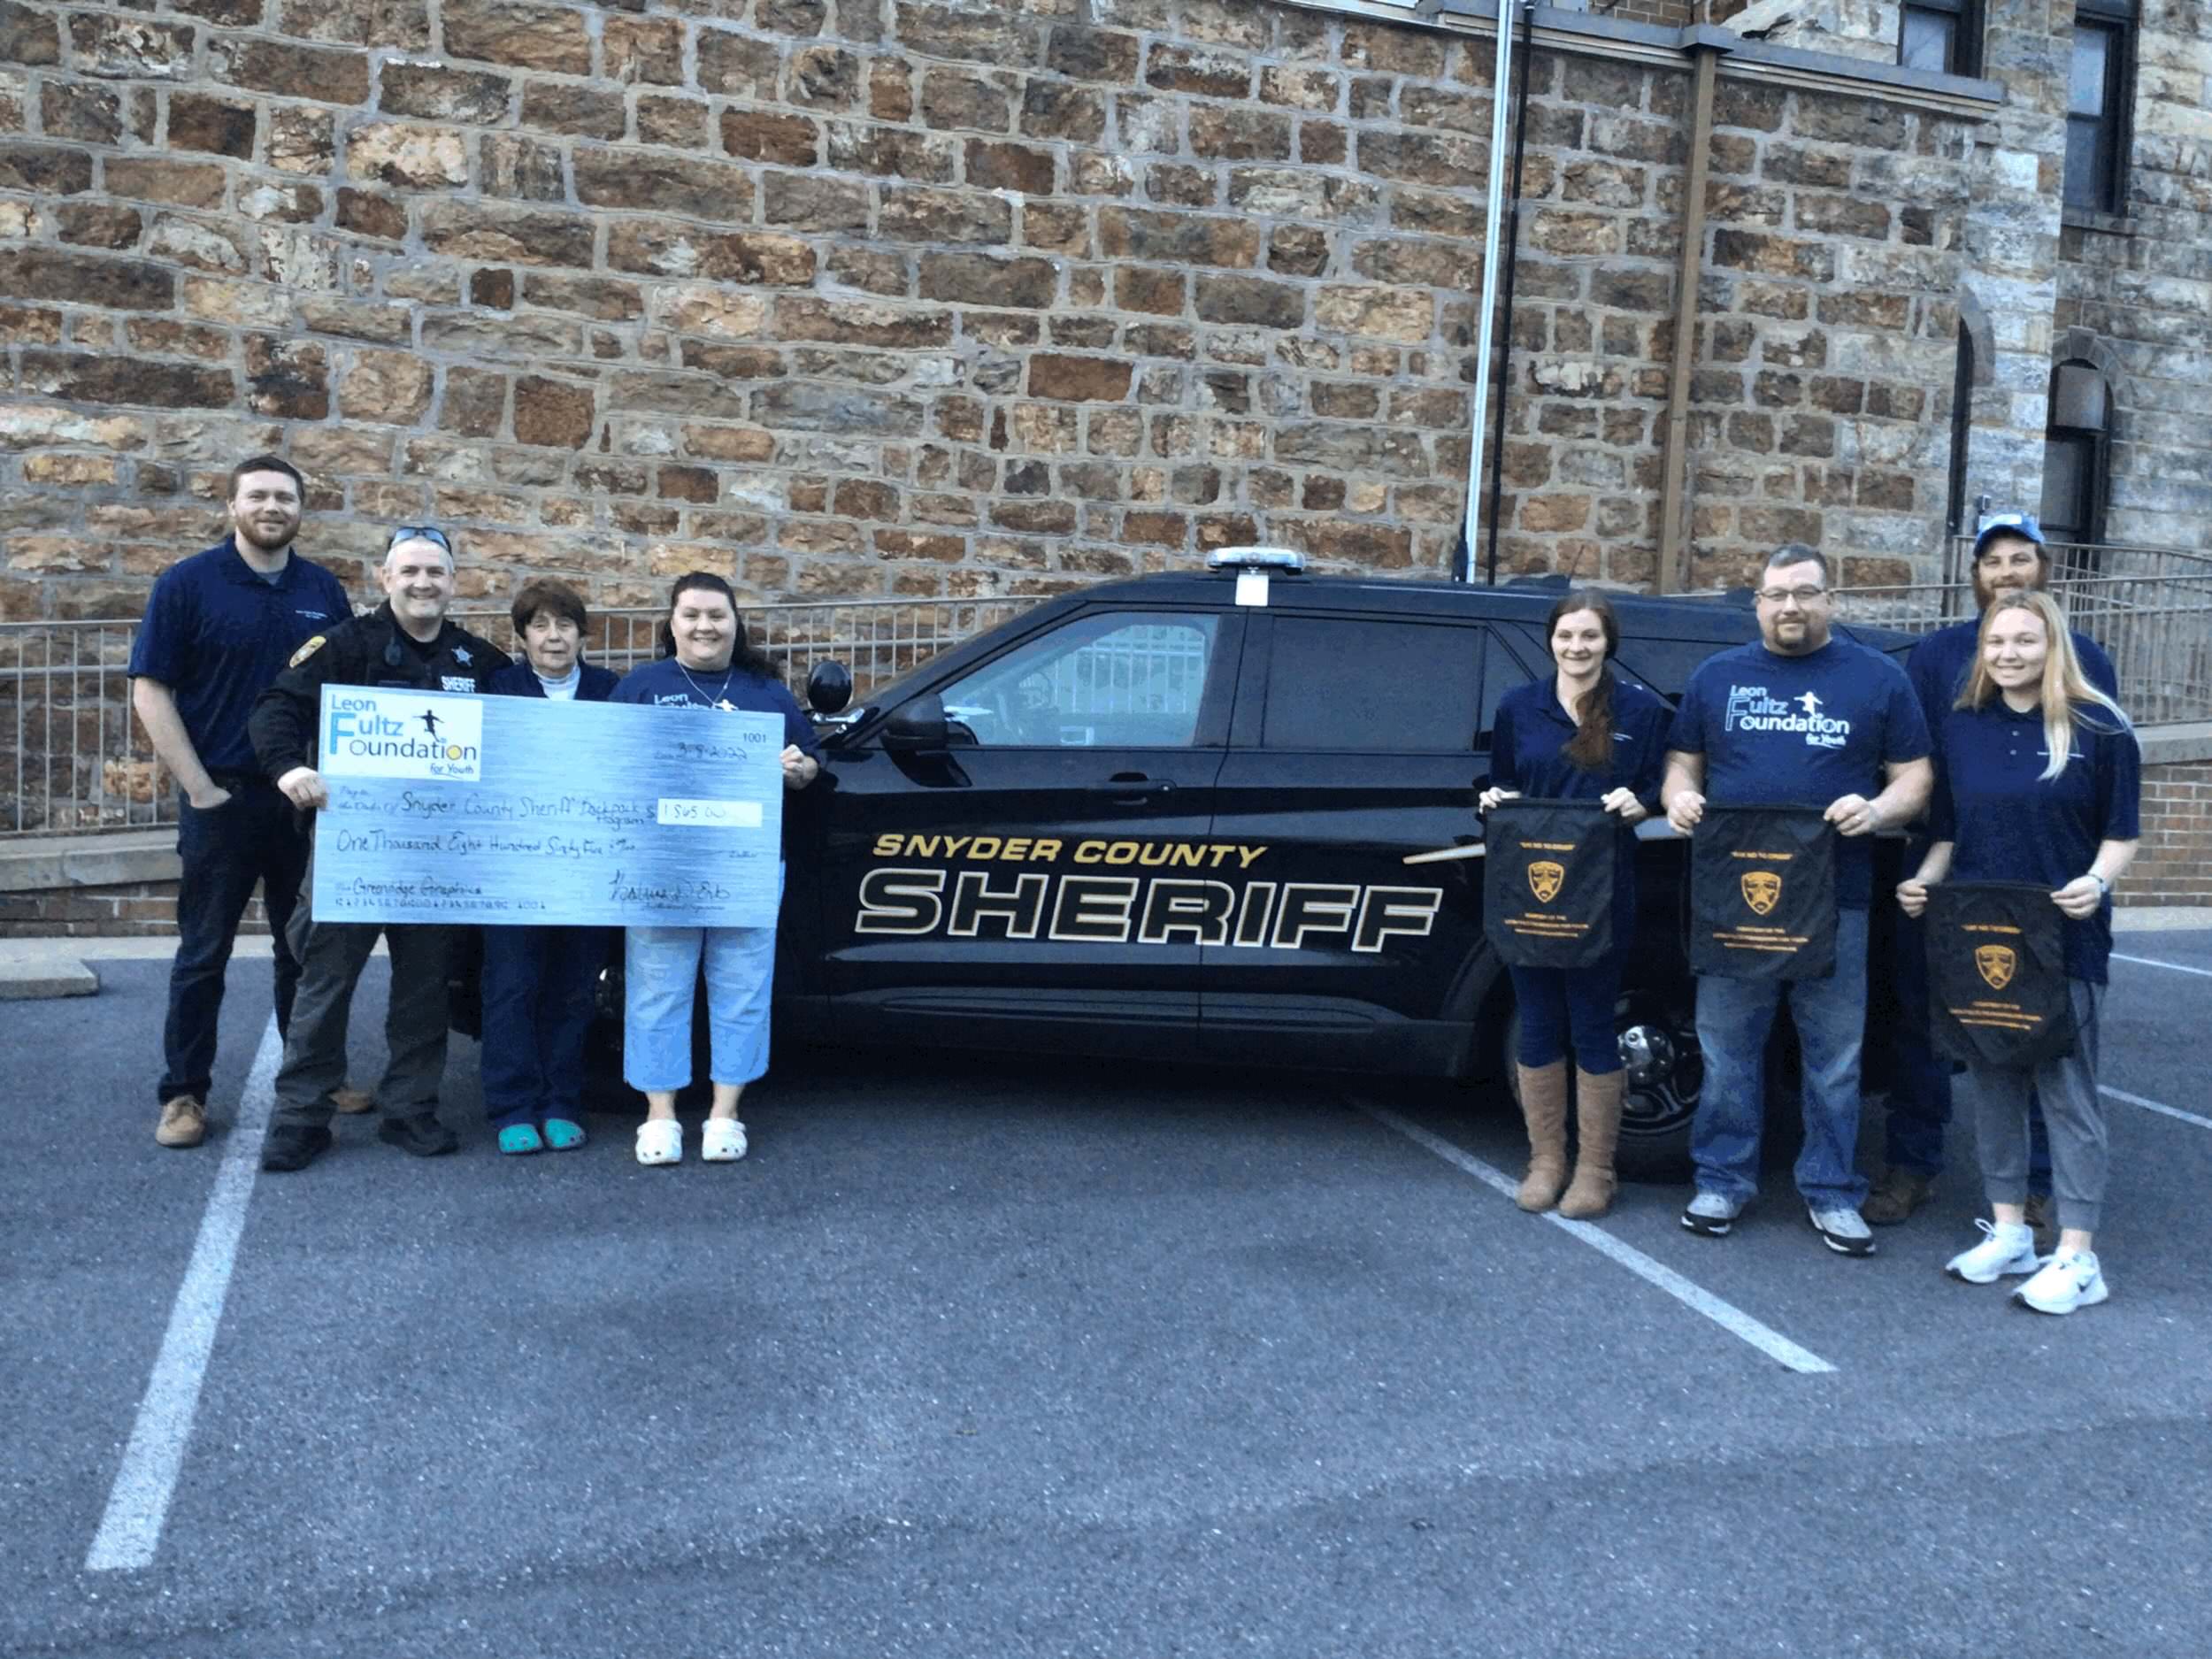 Foundation board members presenting a check to the Snyder County Sheriff's Department